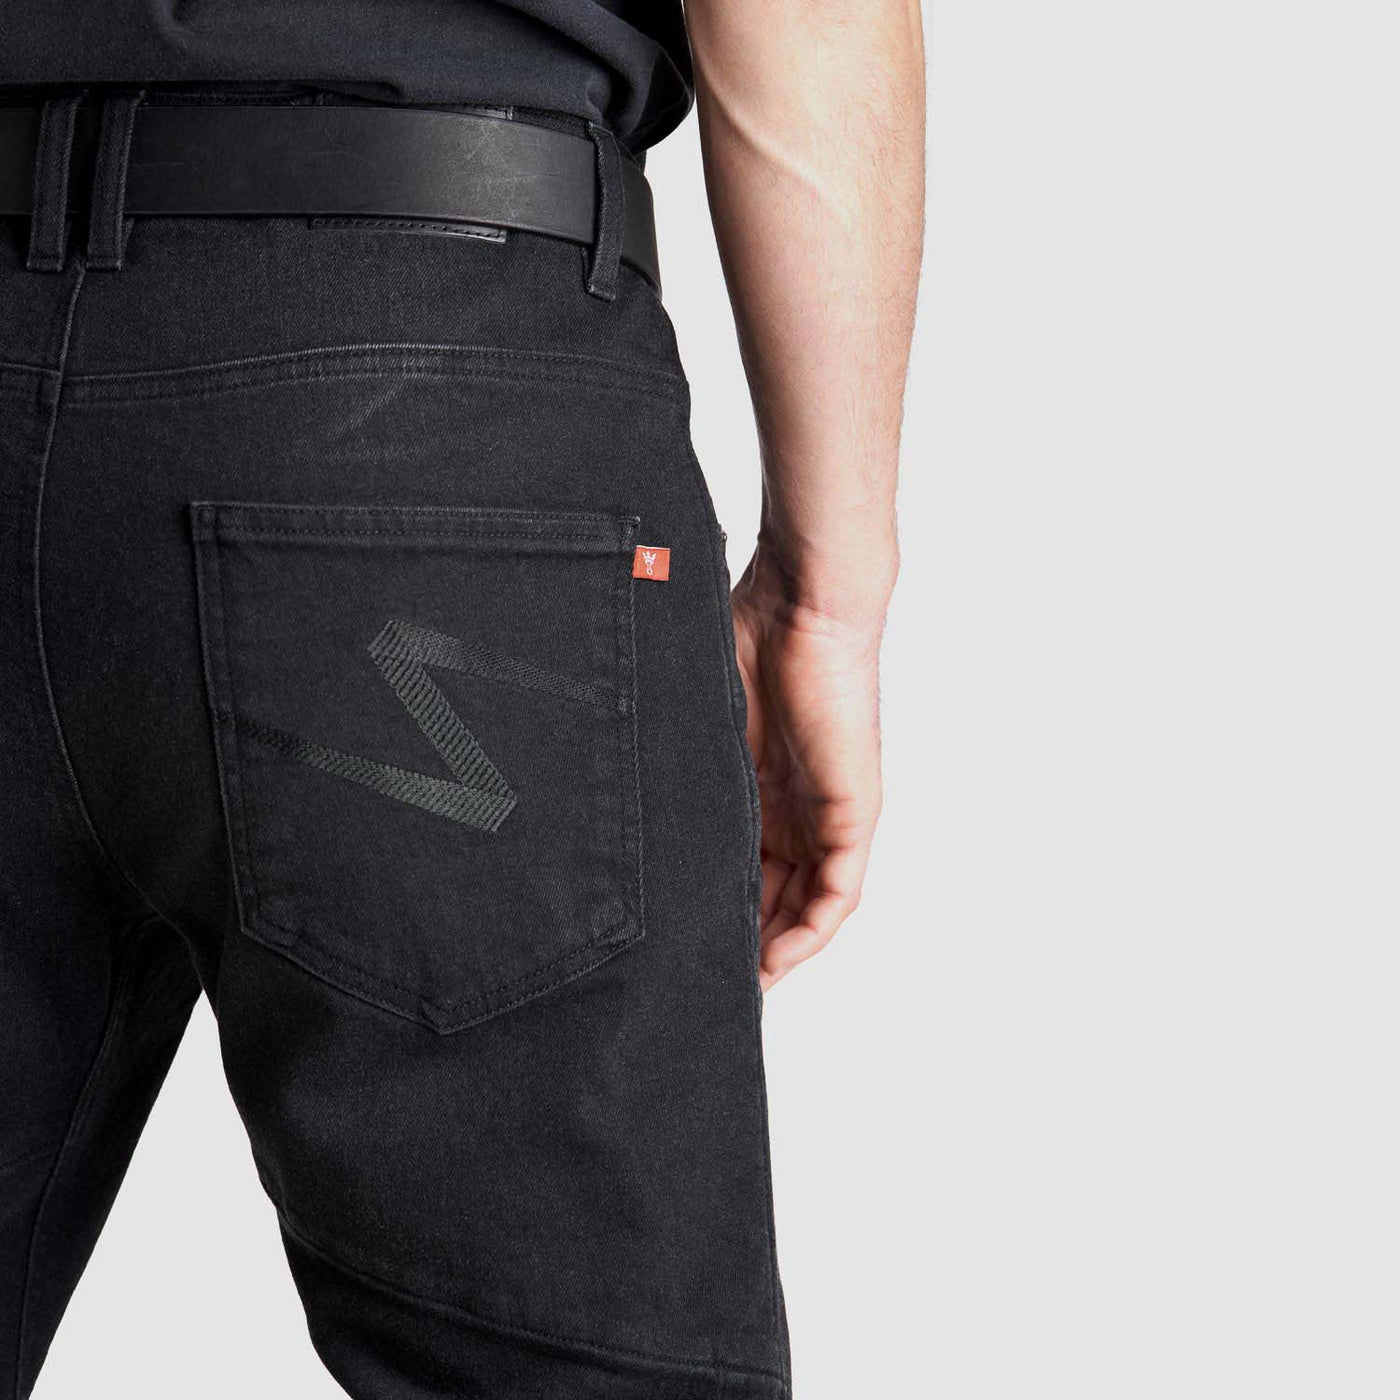 Motorcycle Jeans for Men - Cordura® and UHMWPE, BOSS DYN 01